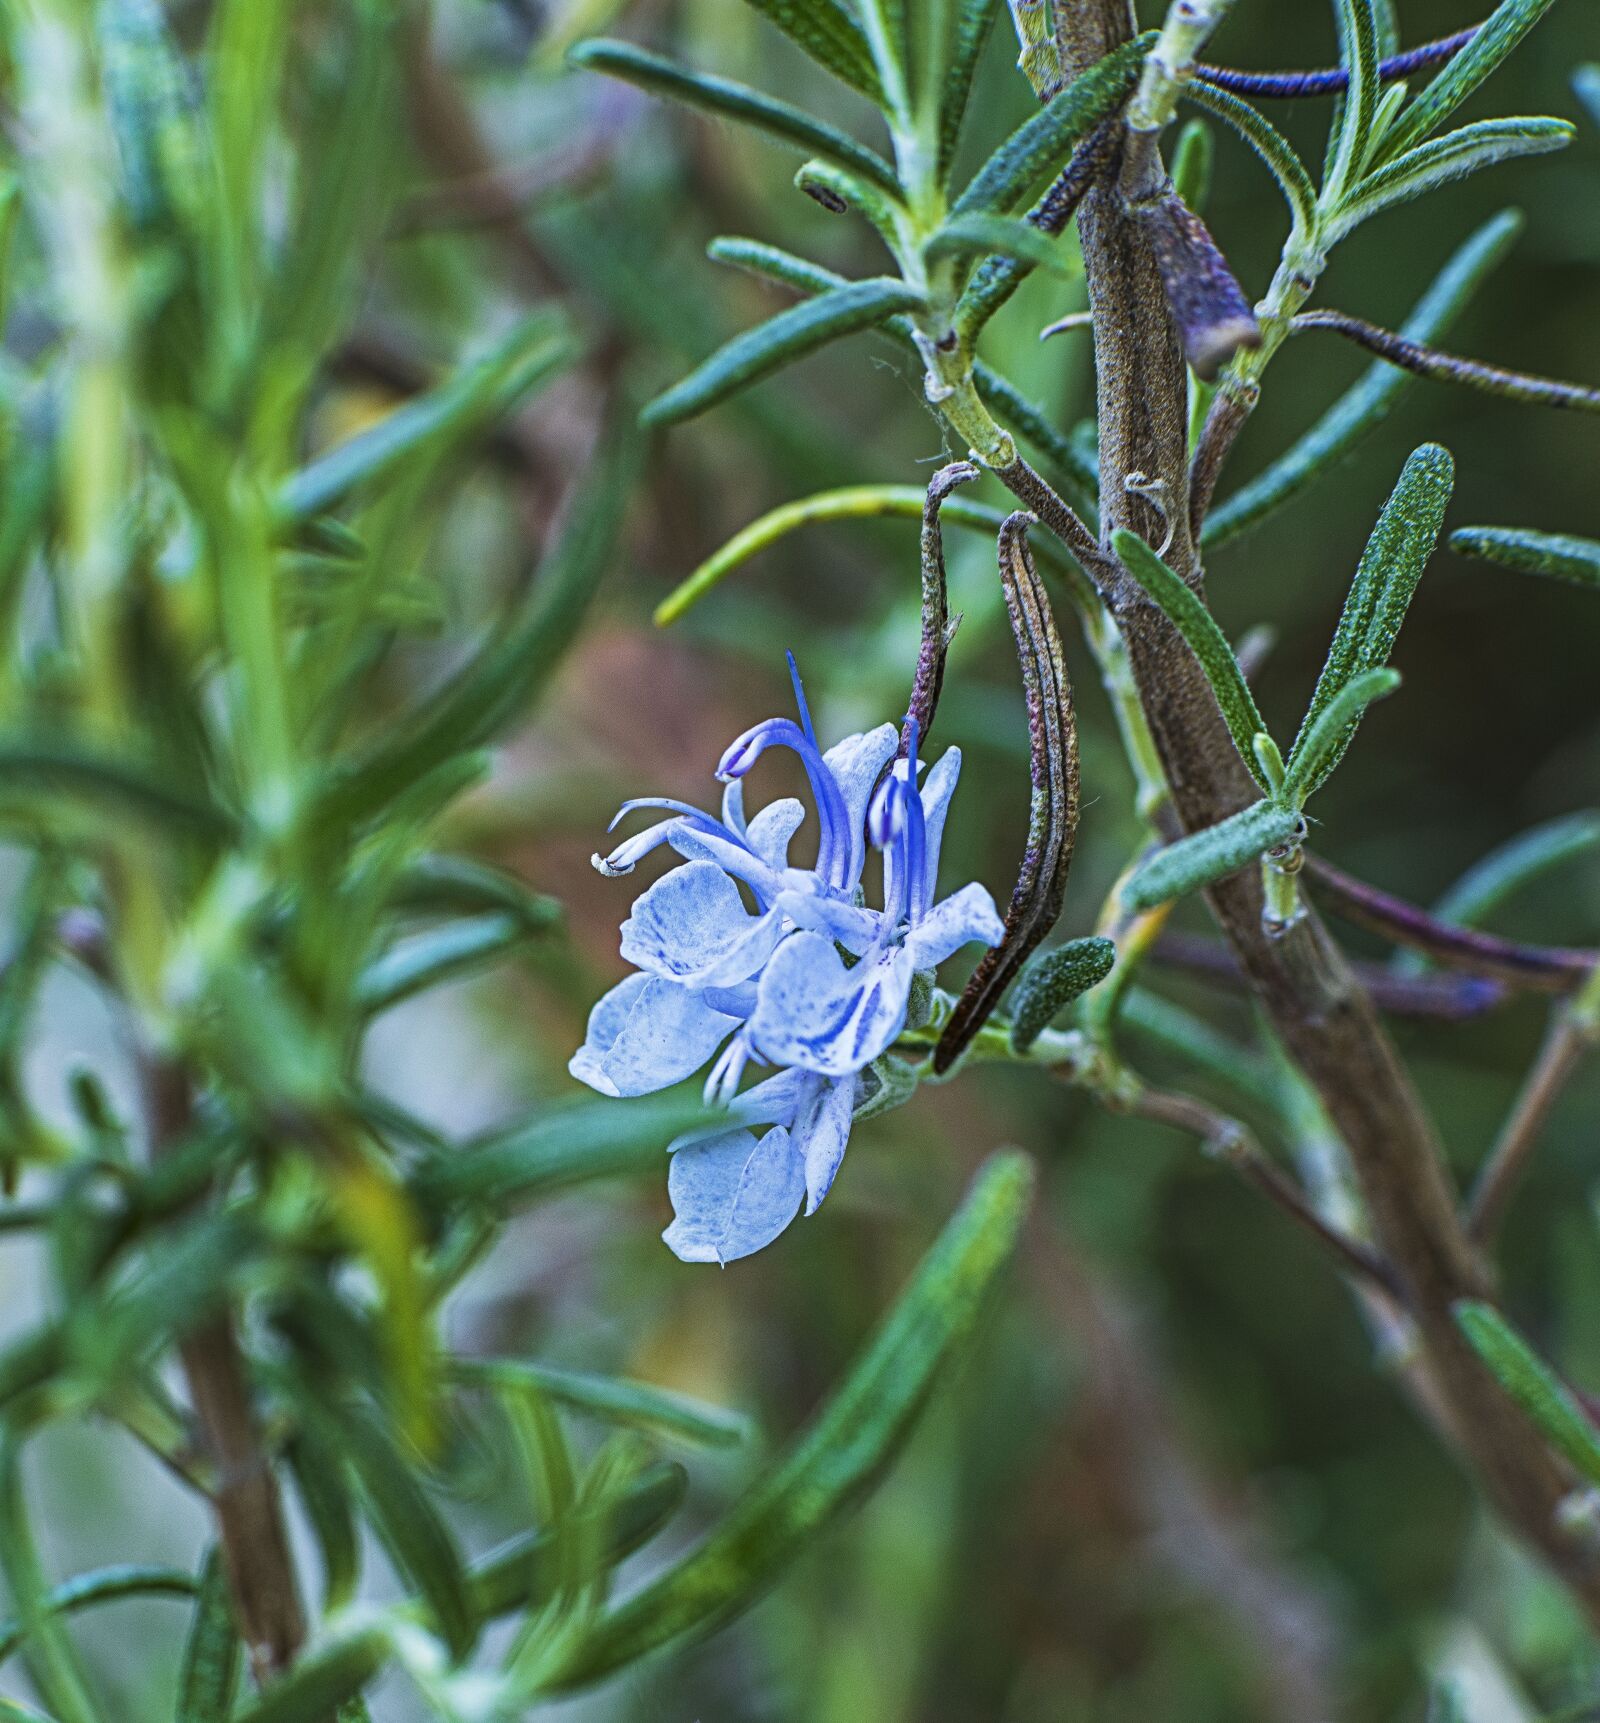 Sony a7R IV sample photo. Rosemary, flower, nature photography